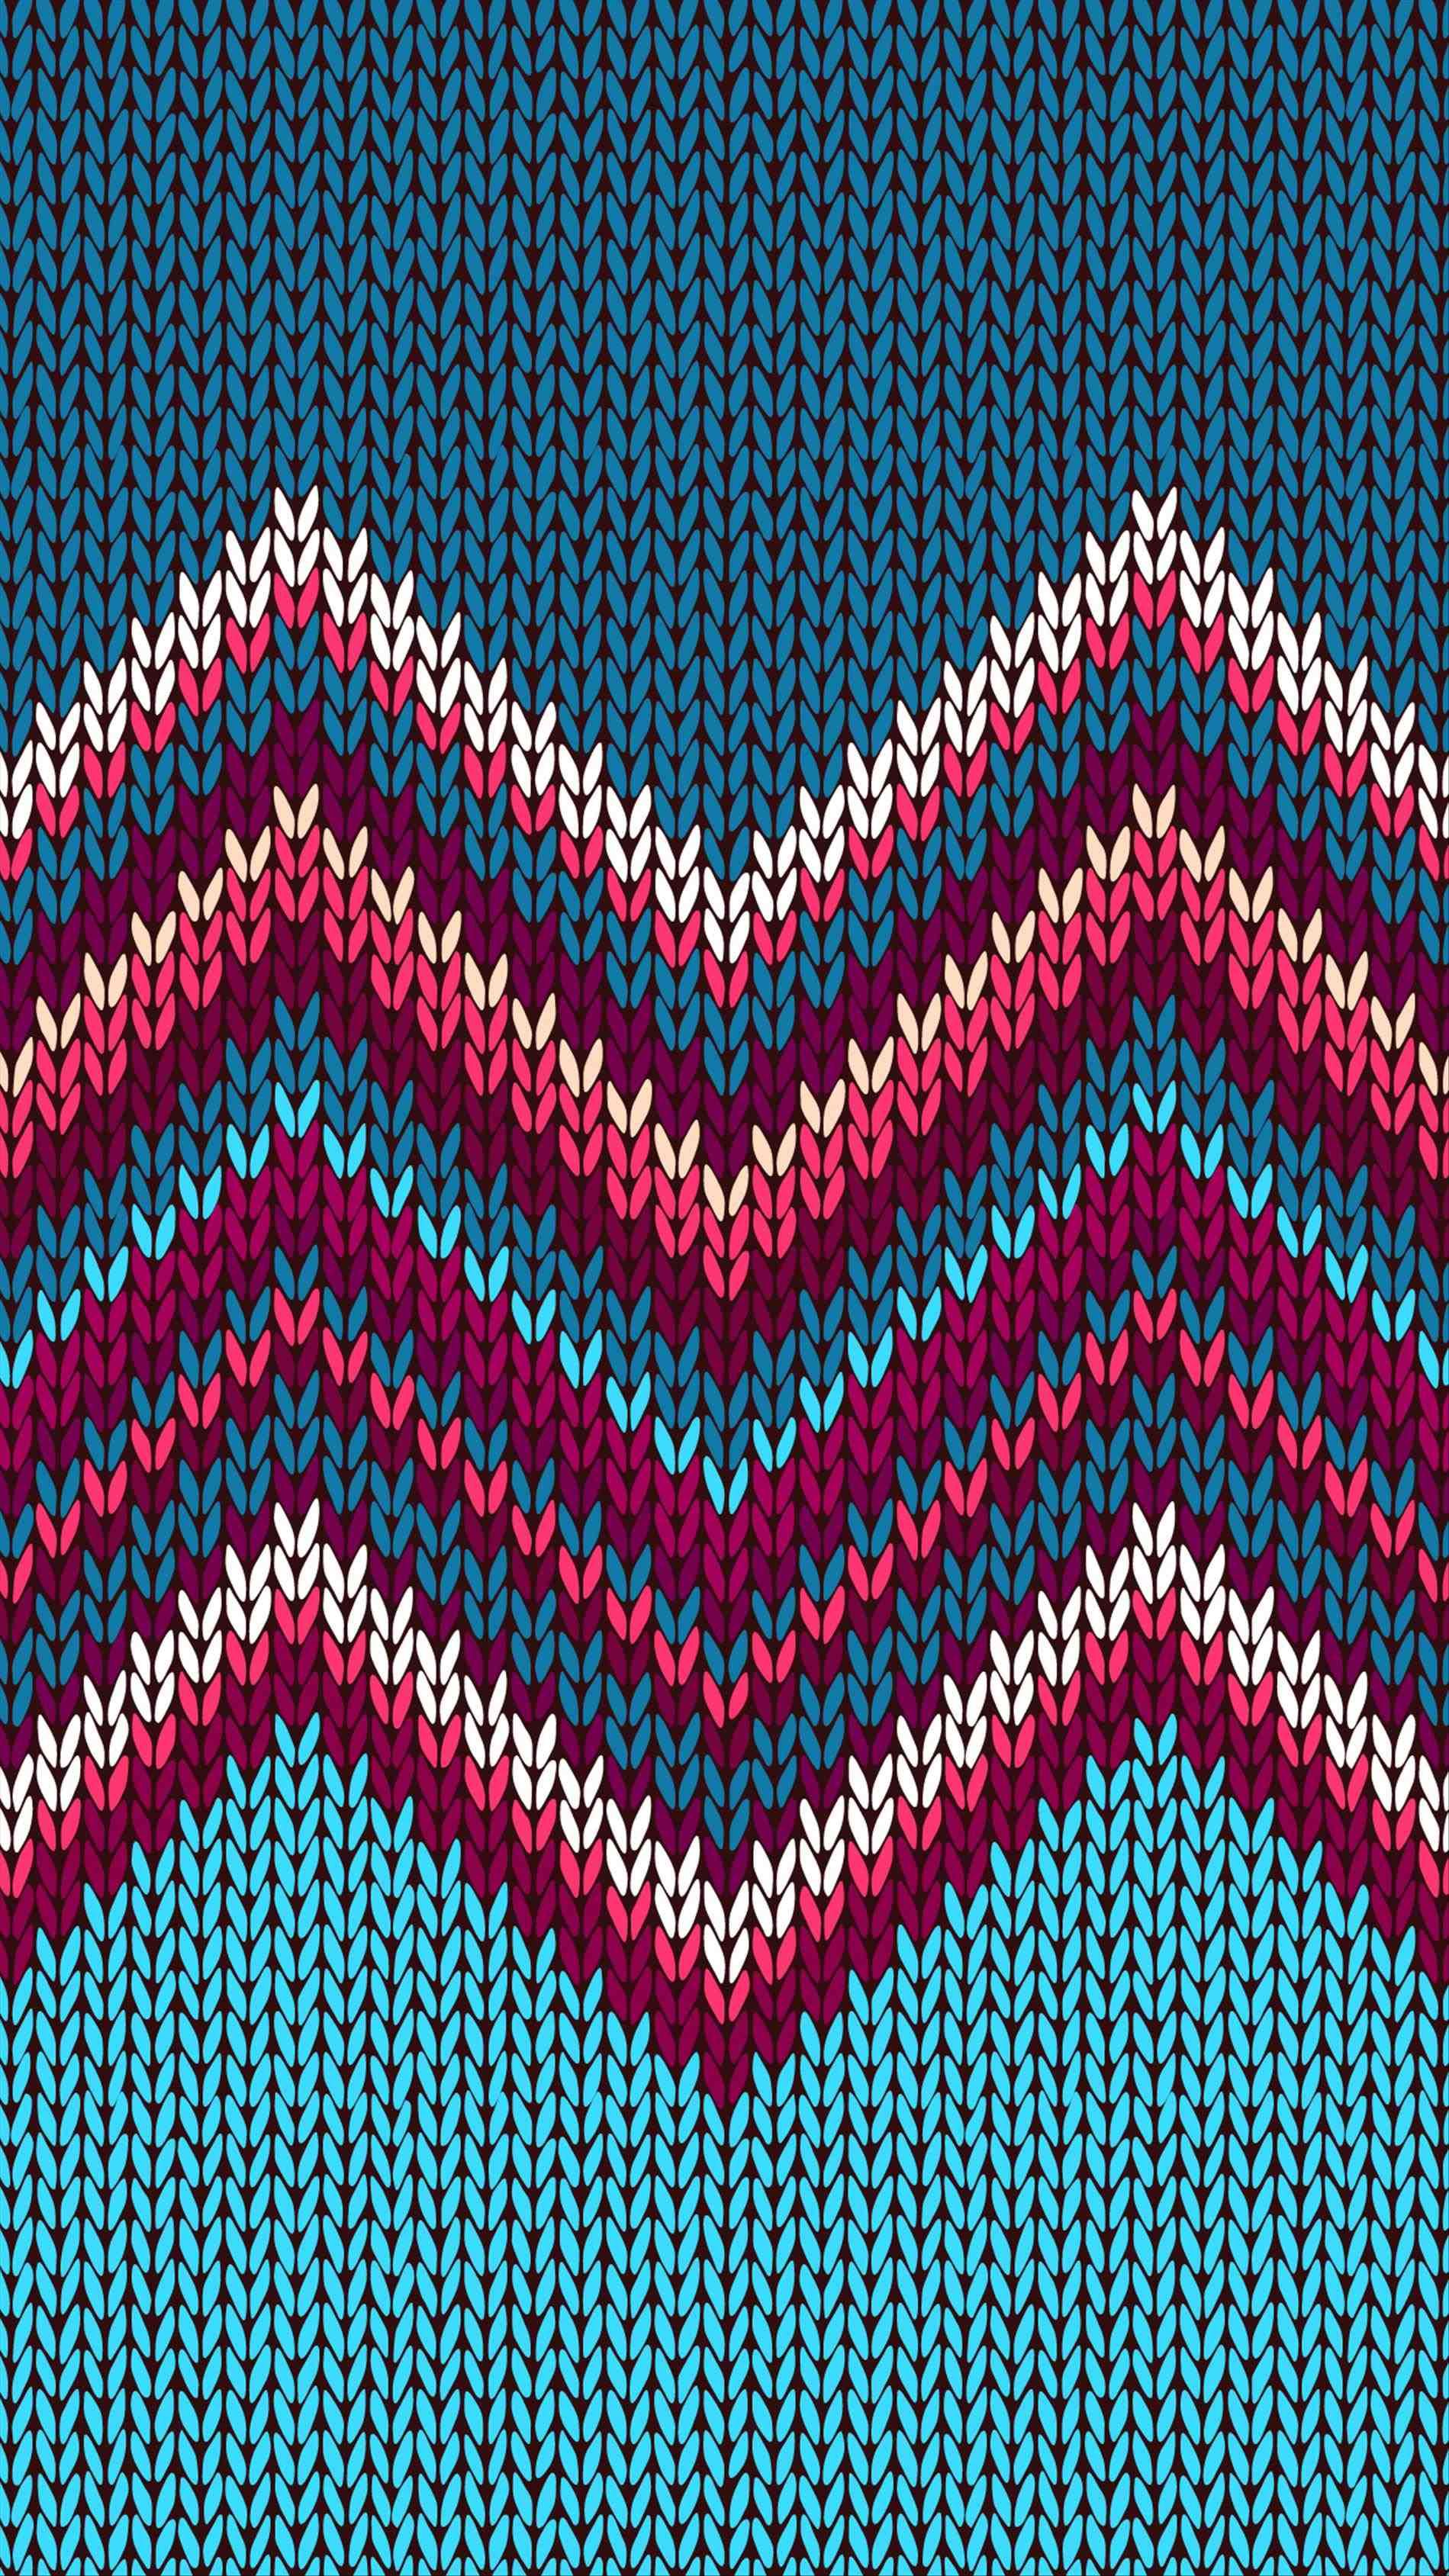 New Christmas Sweater Wallpaper Iphone At Temasistemi - Knit Iphone , HD Wallpaper & Backgrounds